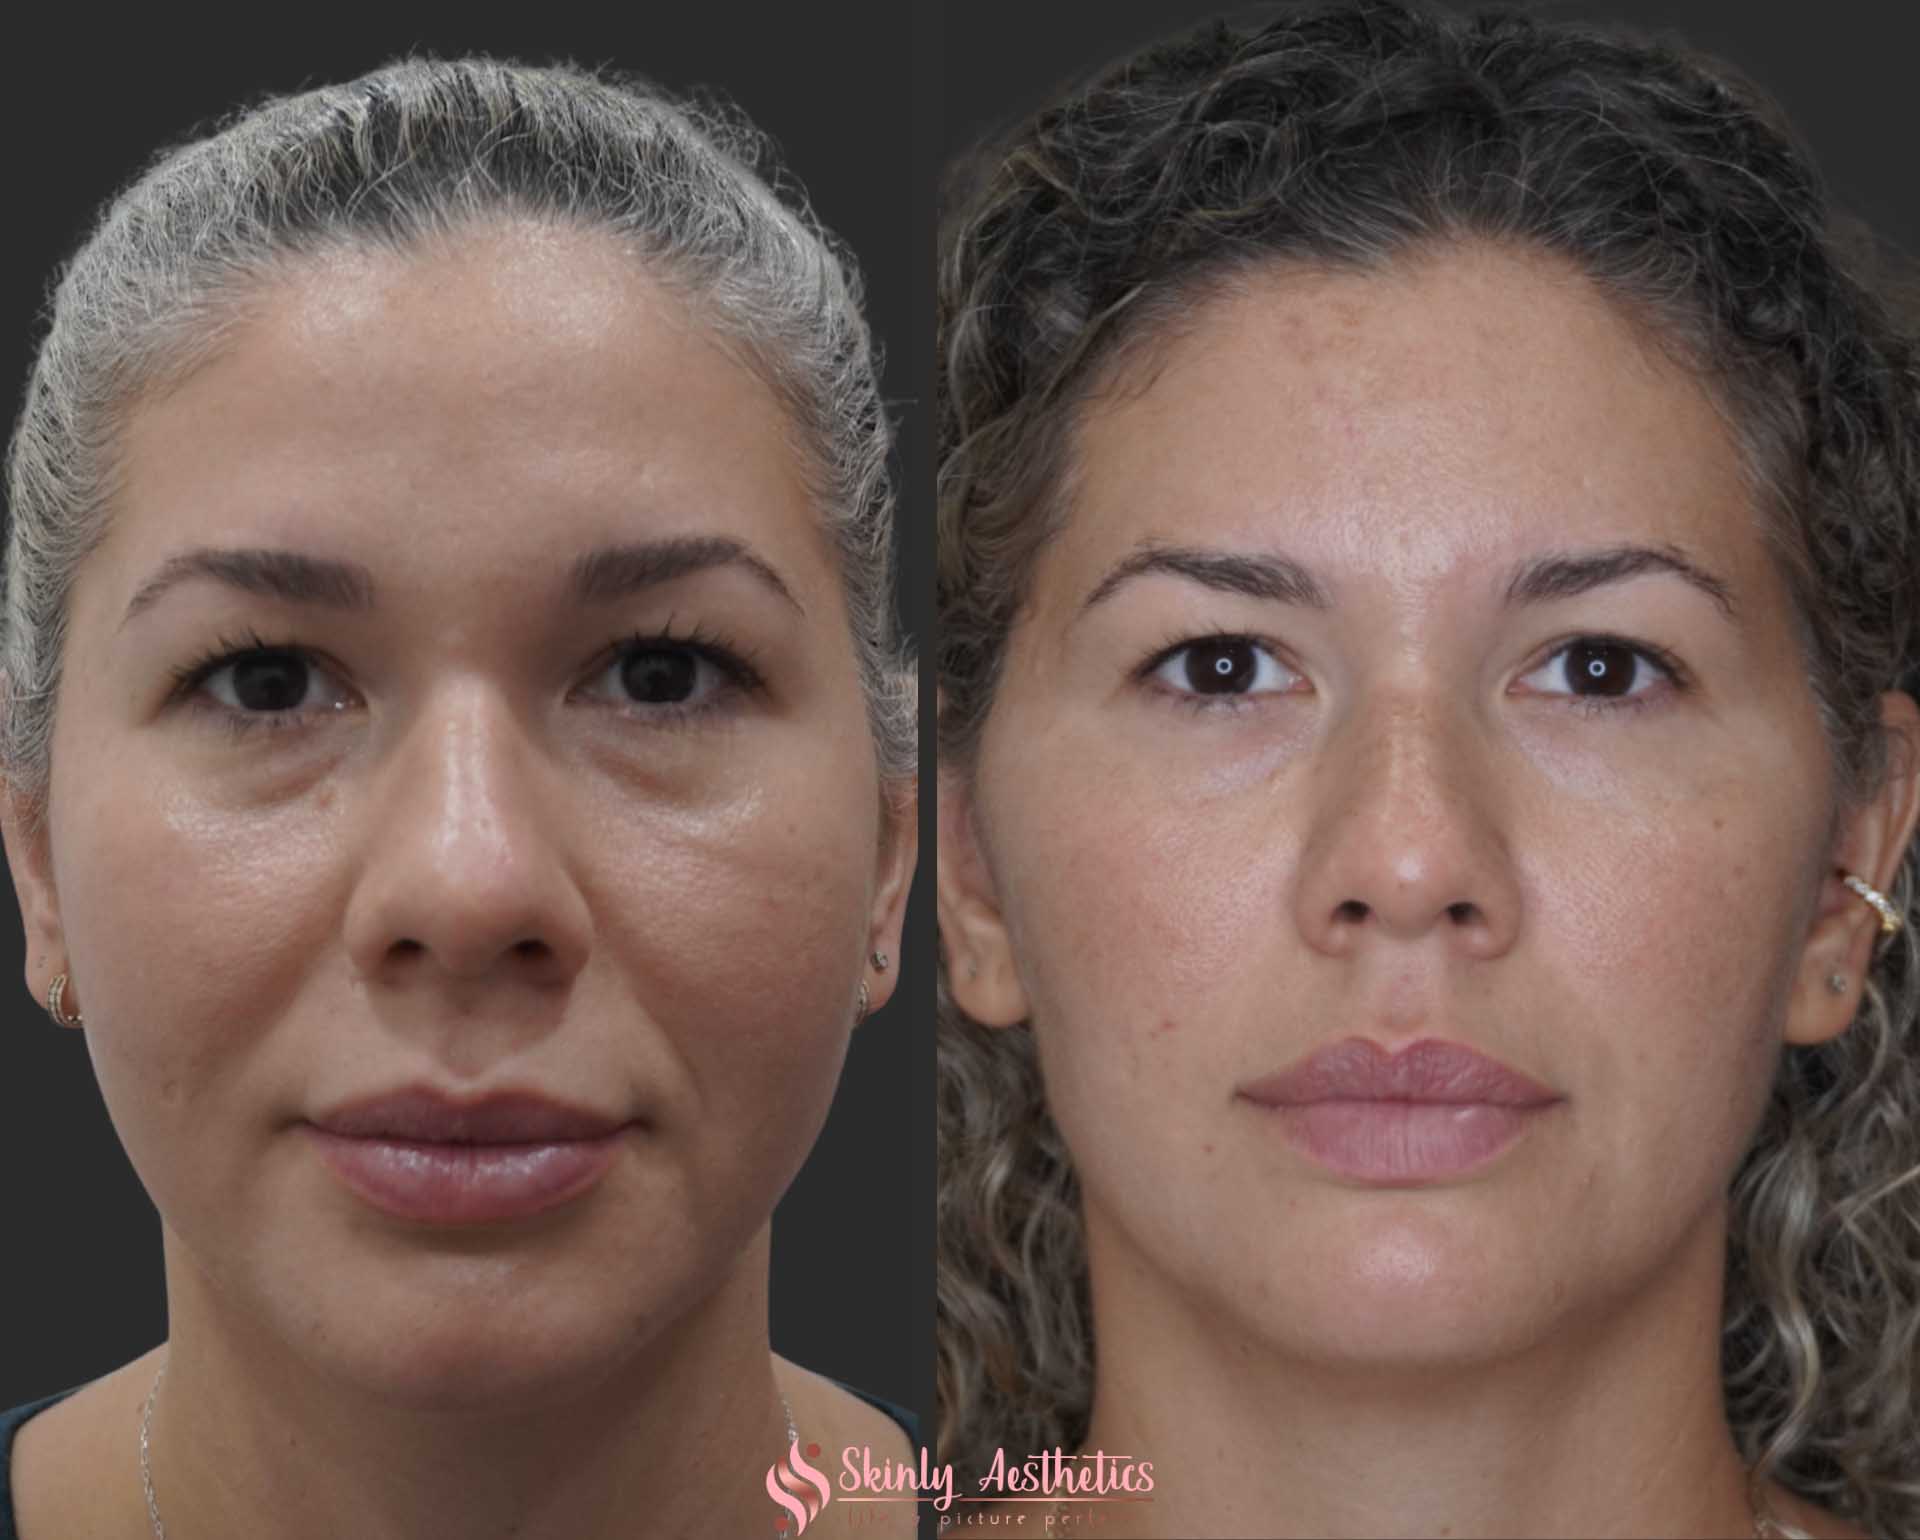 before and after results of the face following non-surgical PDO thread lift